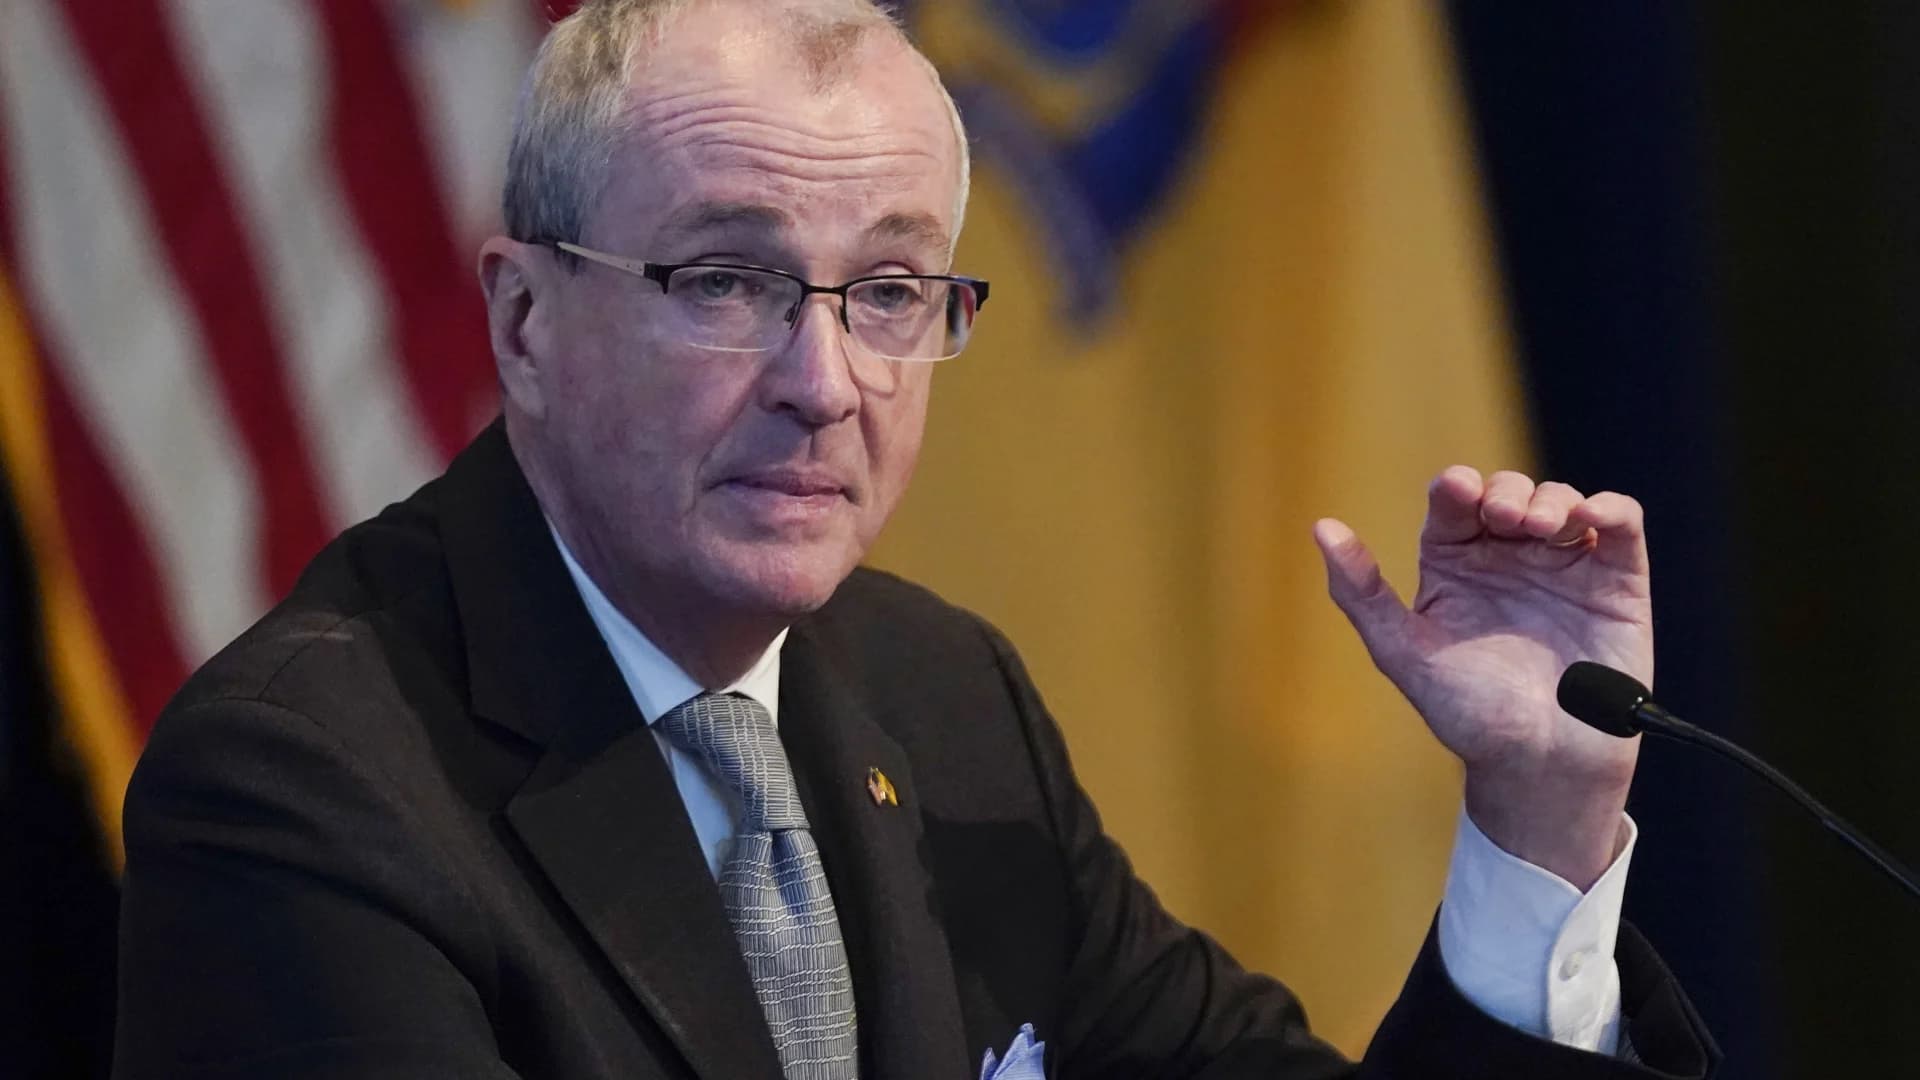 Gov. Murphy signs sweeping legal restrictions on carrying concealed weapons